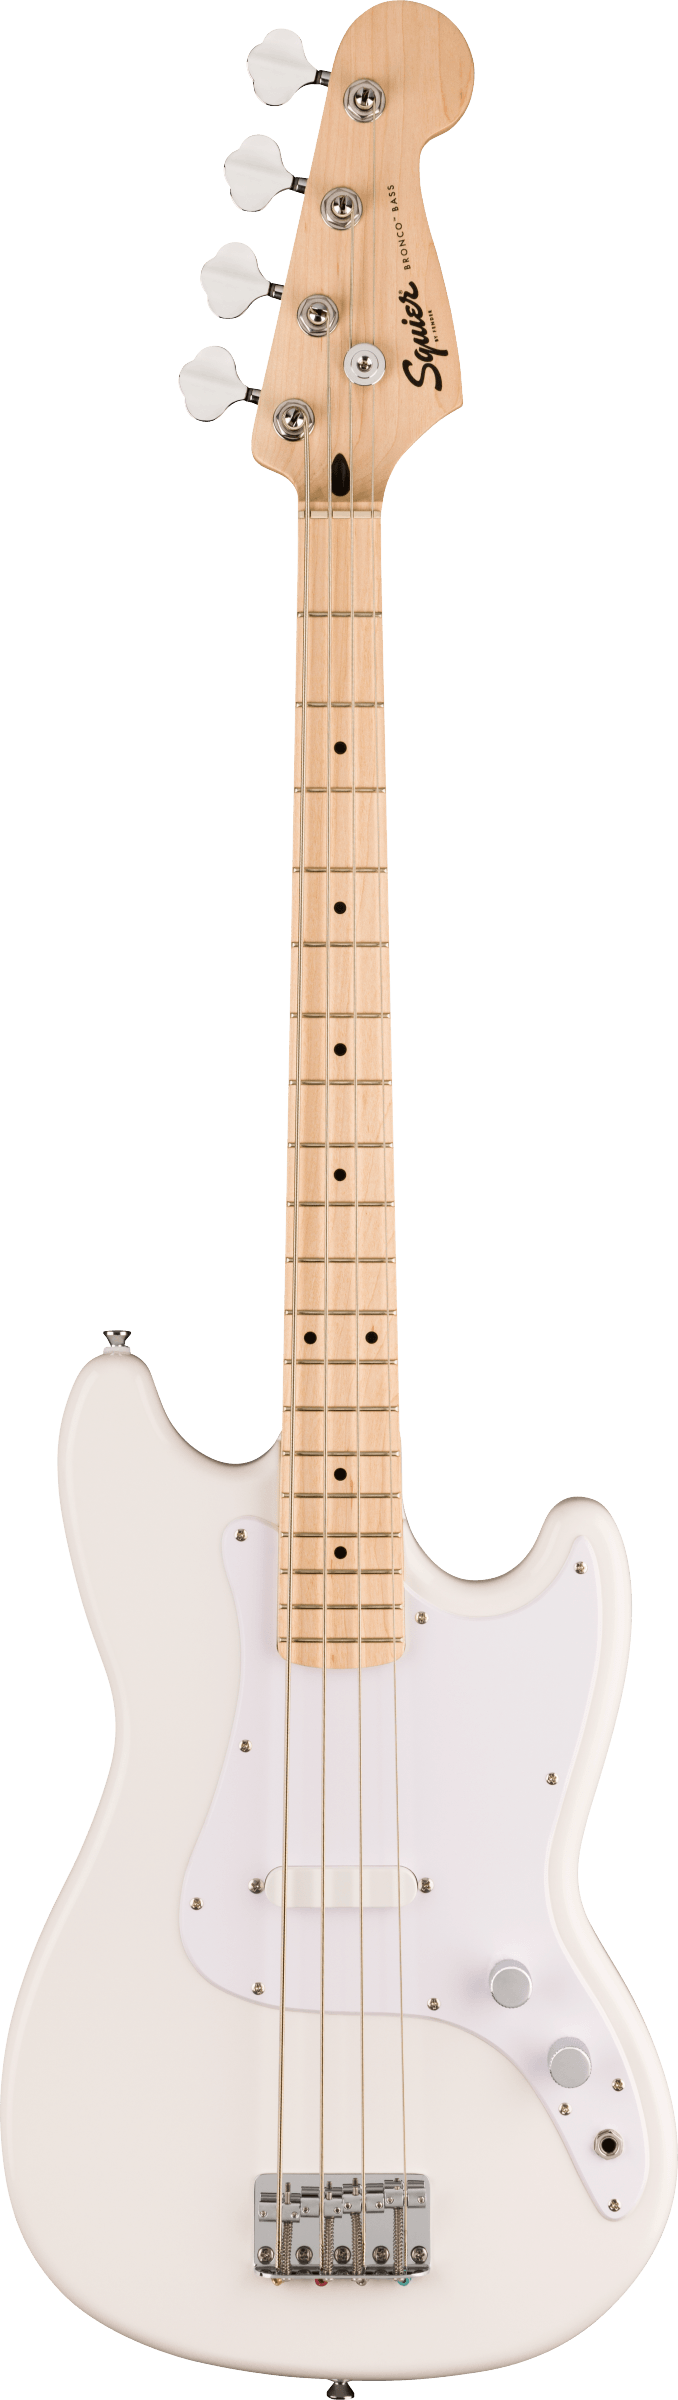 Squier Sonic Bronco Shortscale Bass in Arctic White